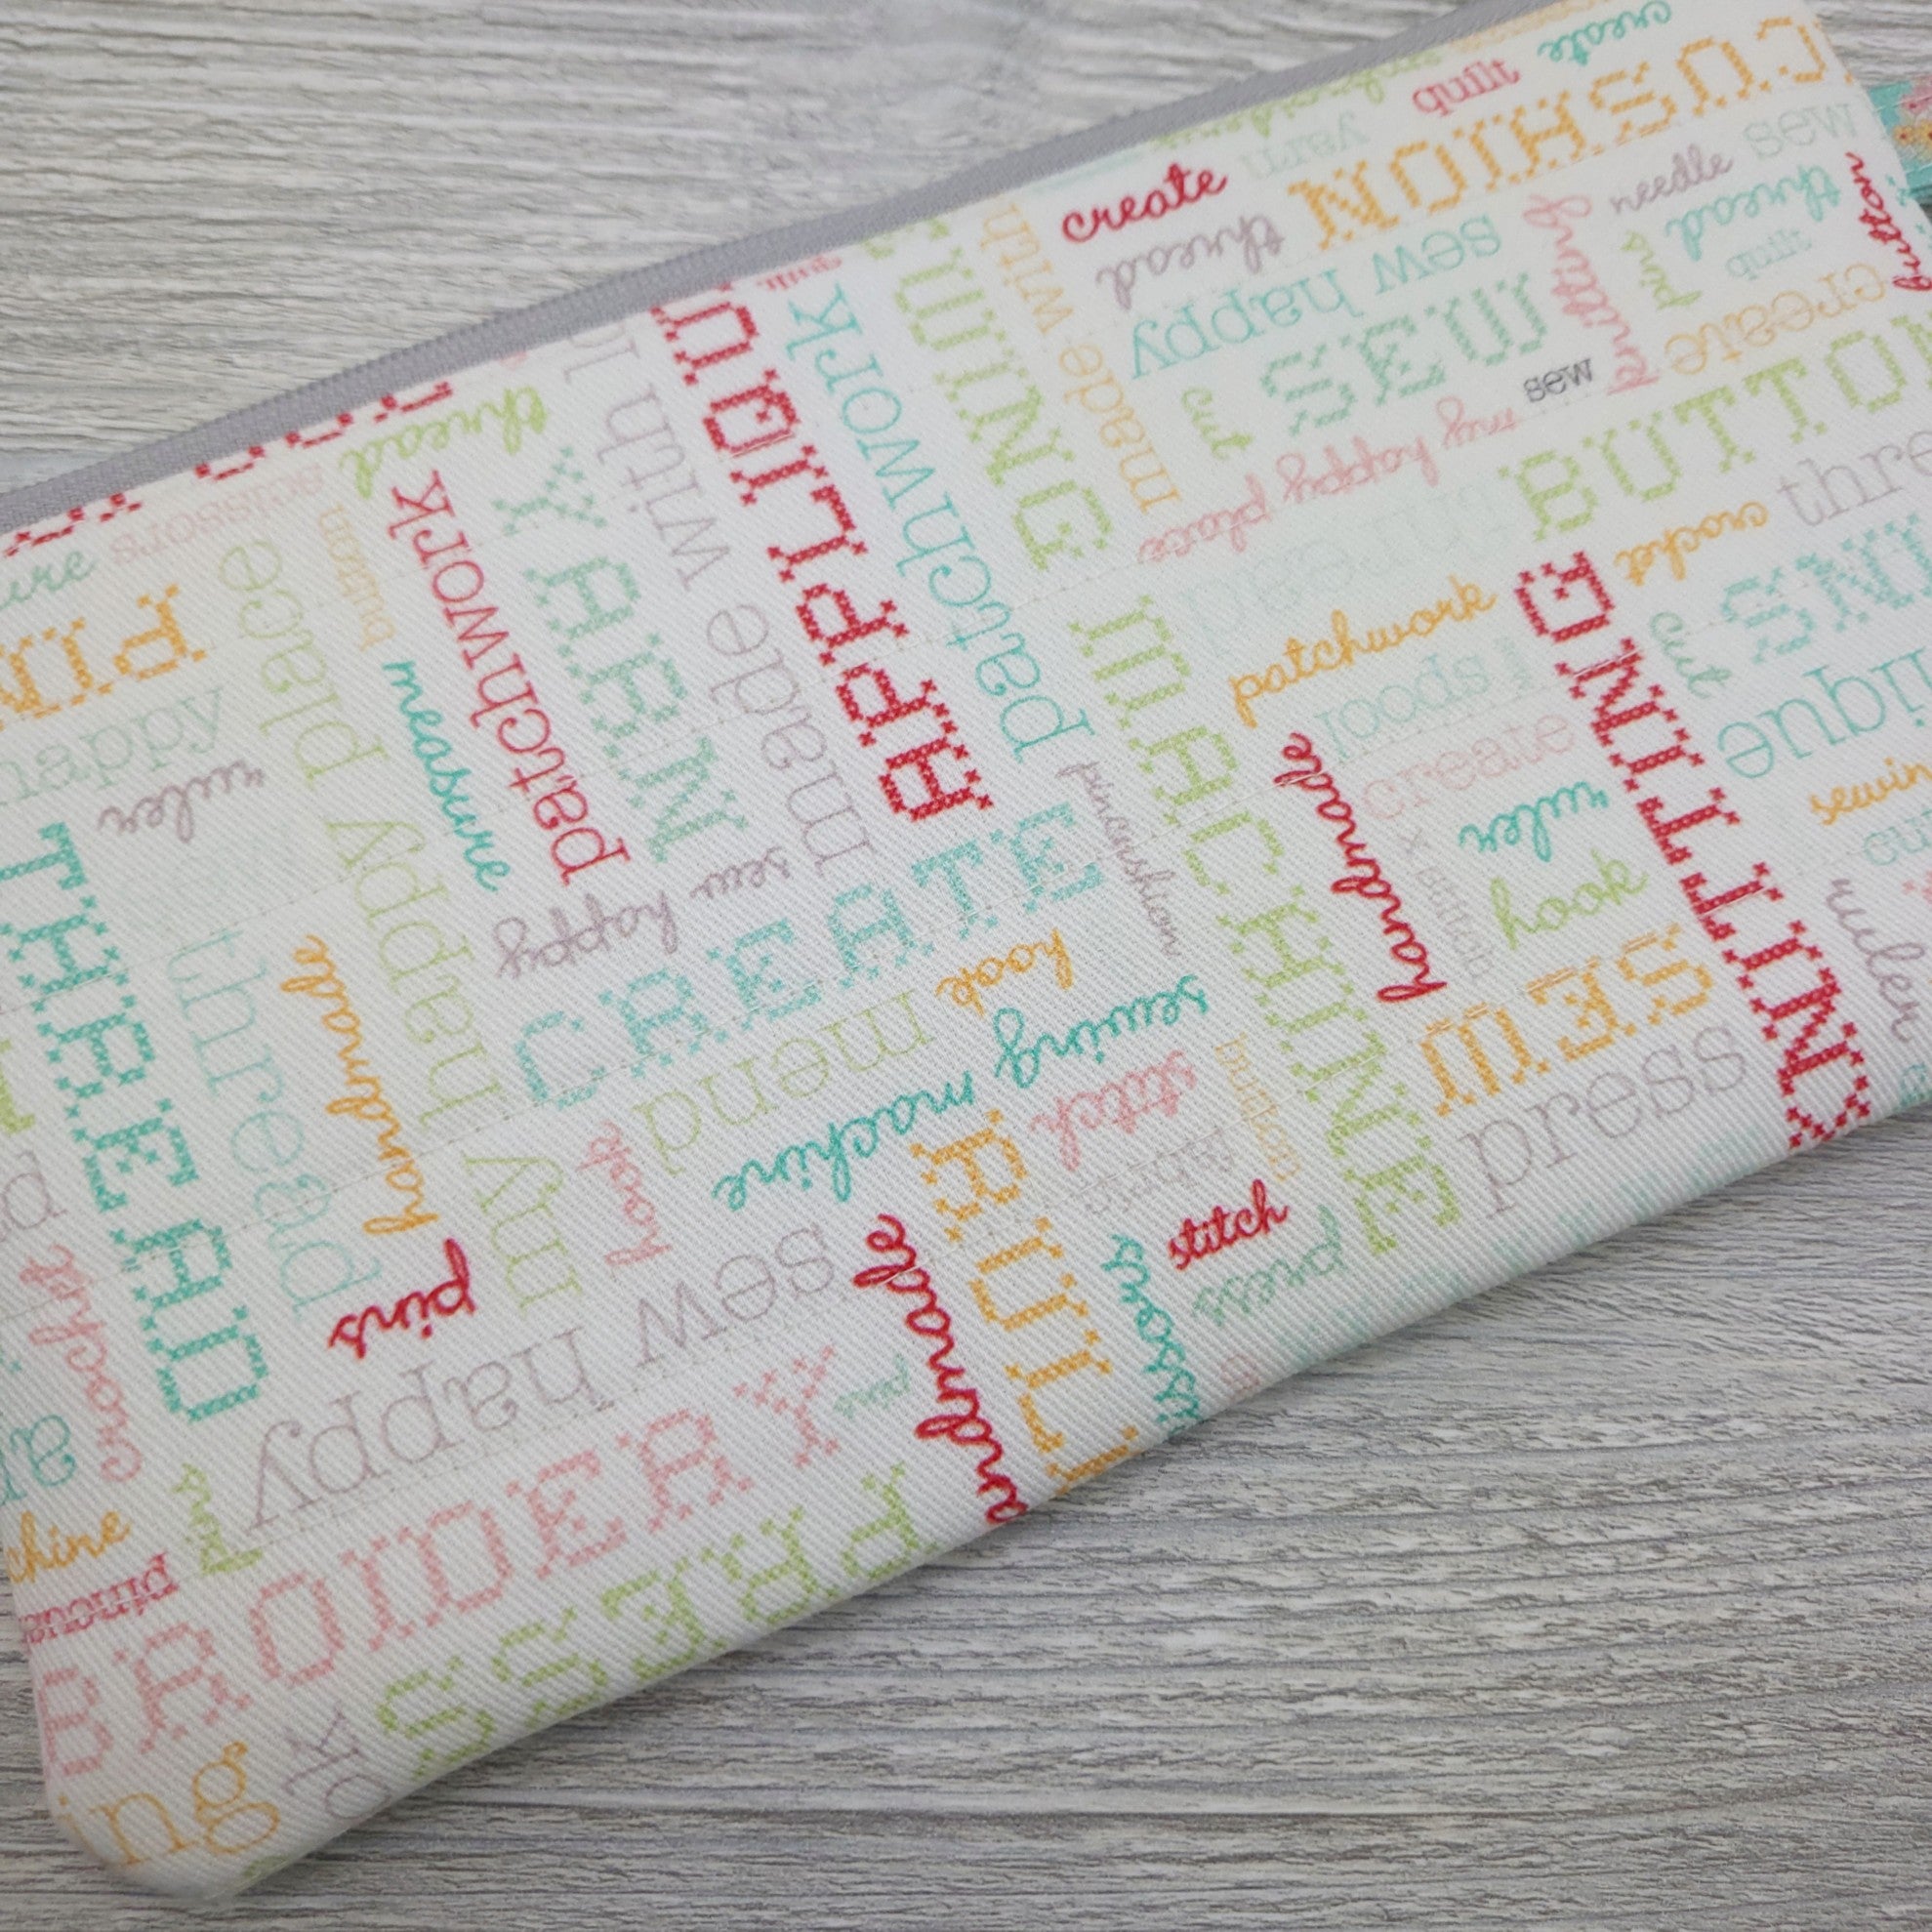 Zipper pouch for crafters. 